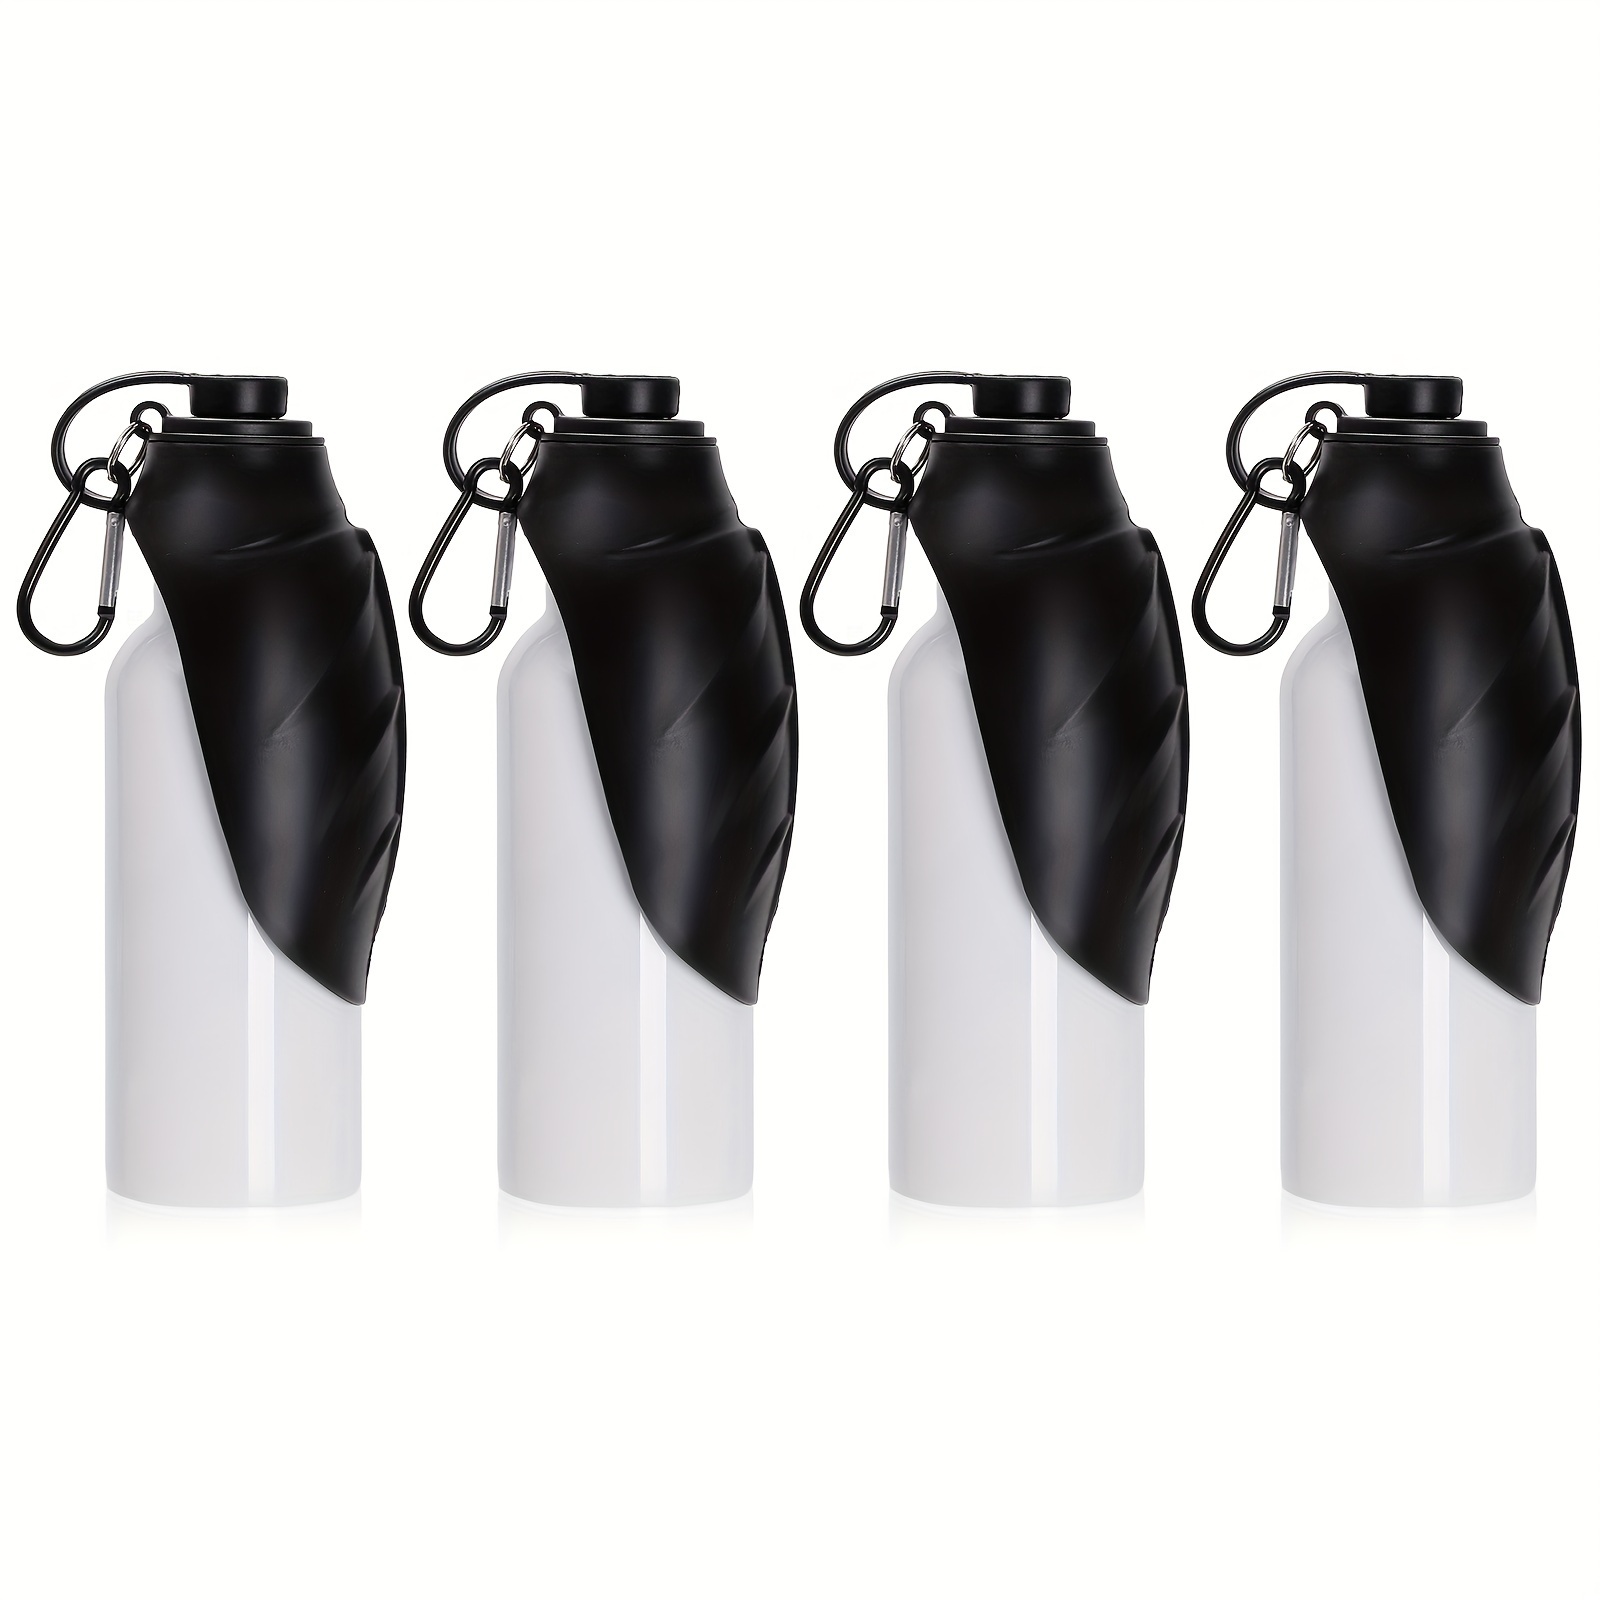 

20 Oz Sublimation Dogs Pets Water Bottle Blanks White With Silicone Lid And Carabiner Stainless Steel Single Wall Water Bottles For Tumbler Heat Press Sublimation Oven Printing (black Lids)